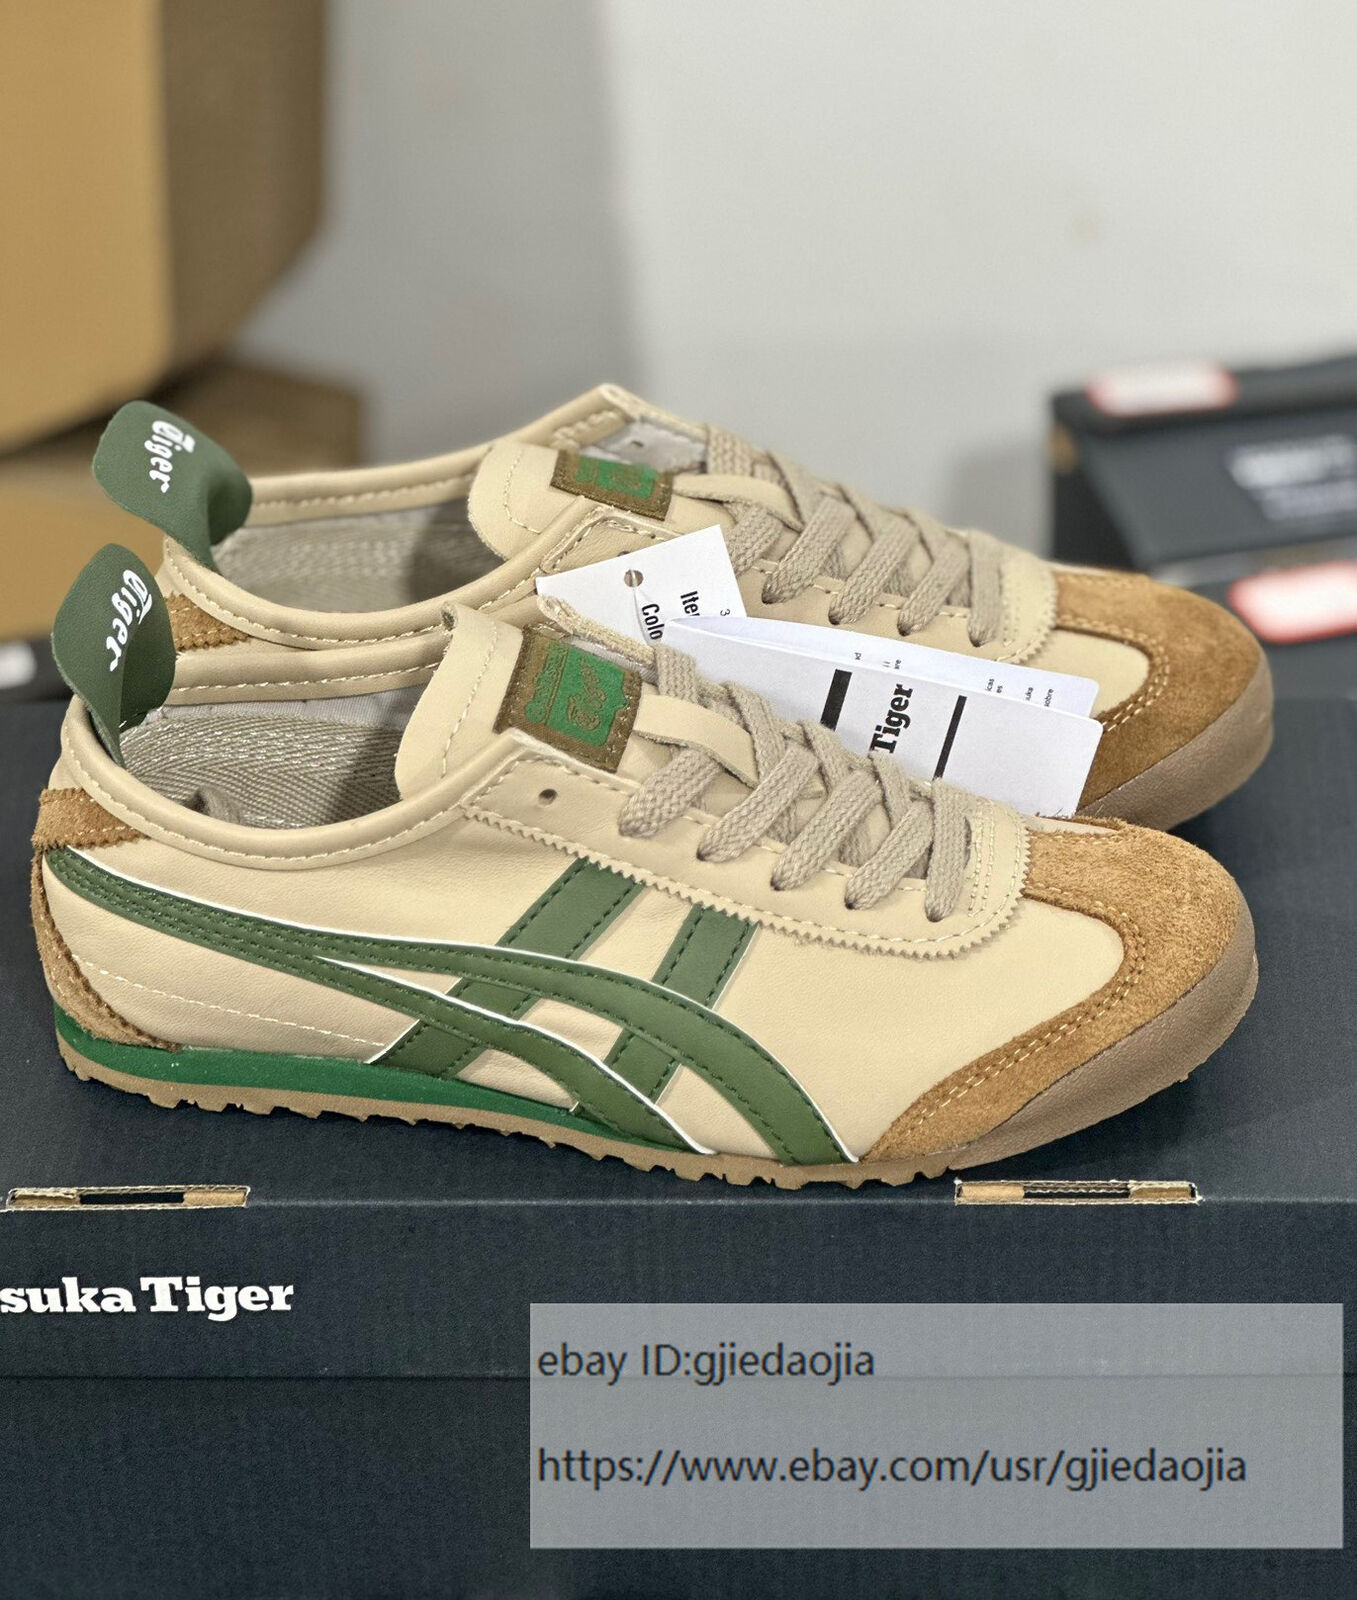 Onitsuka Tiger MEXICO 66 1183C102-250 Beige Grass Green Sneakers Shoes Unisex